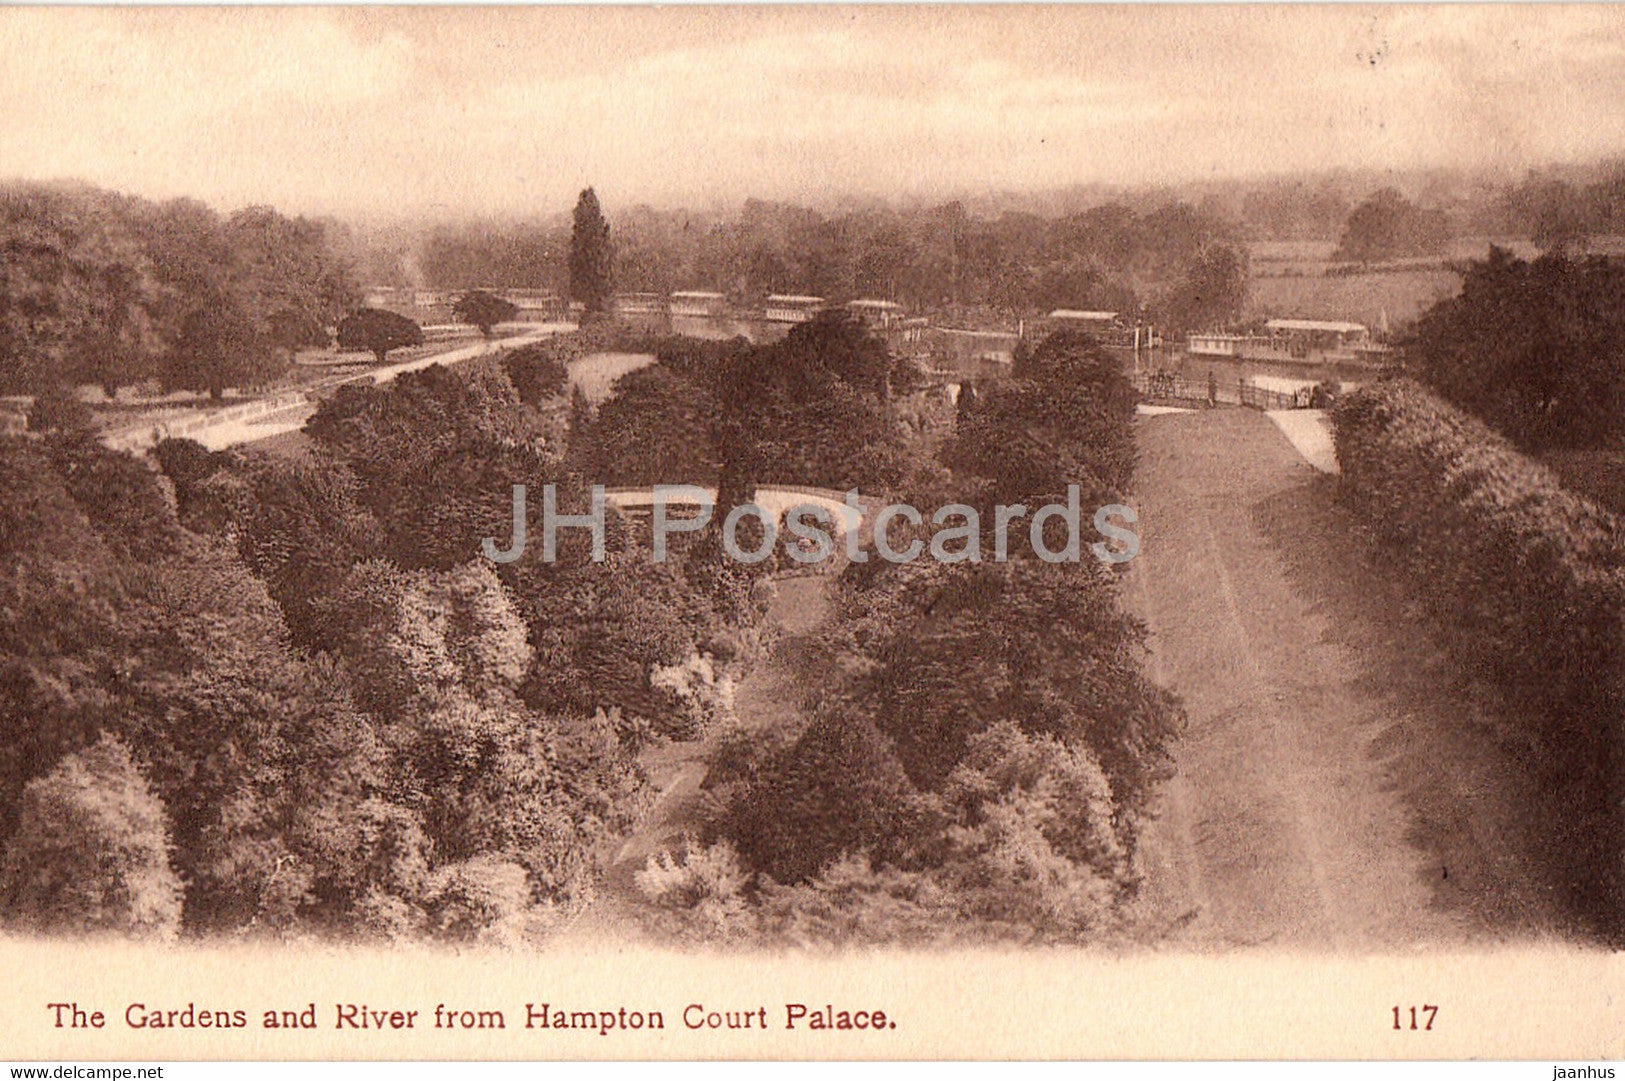 The Gardens and River from Hampton Court Palace - 117 - old postcard - England - United Kingdom - unused - JH Postcards